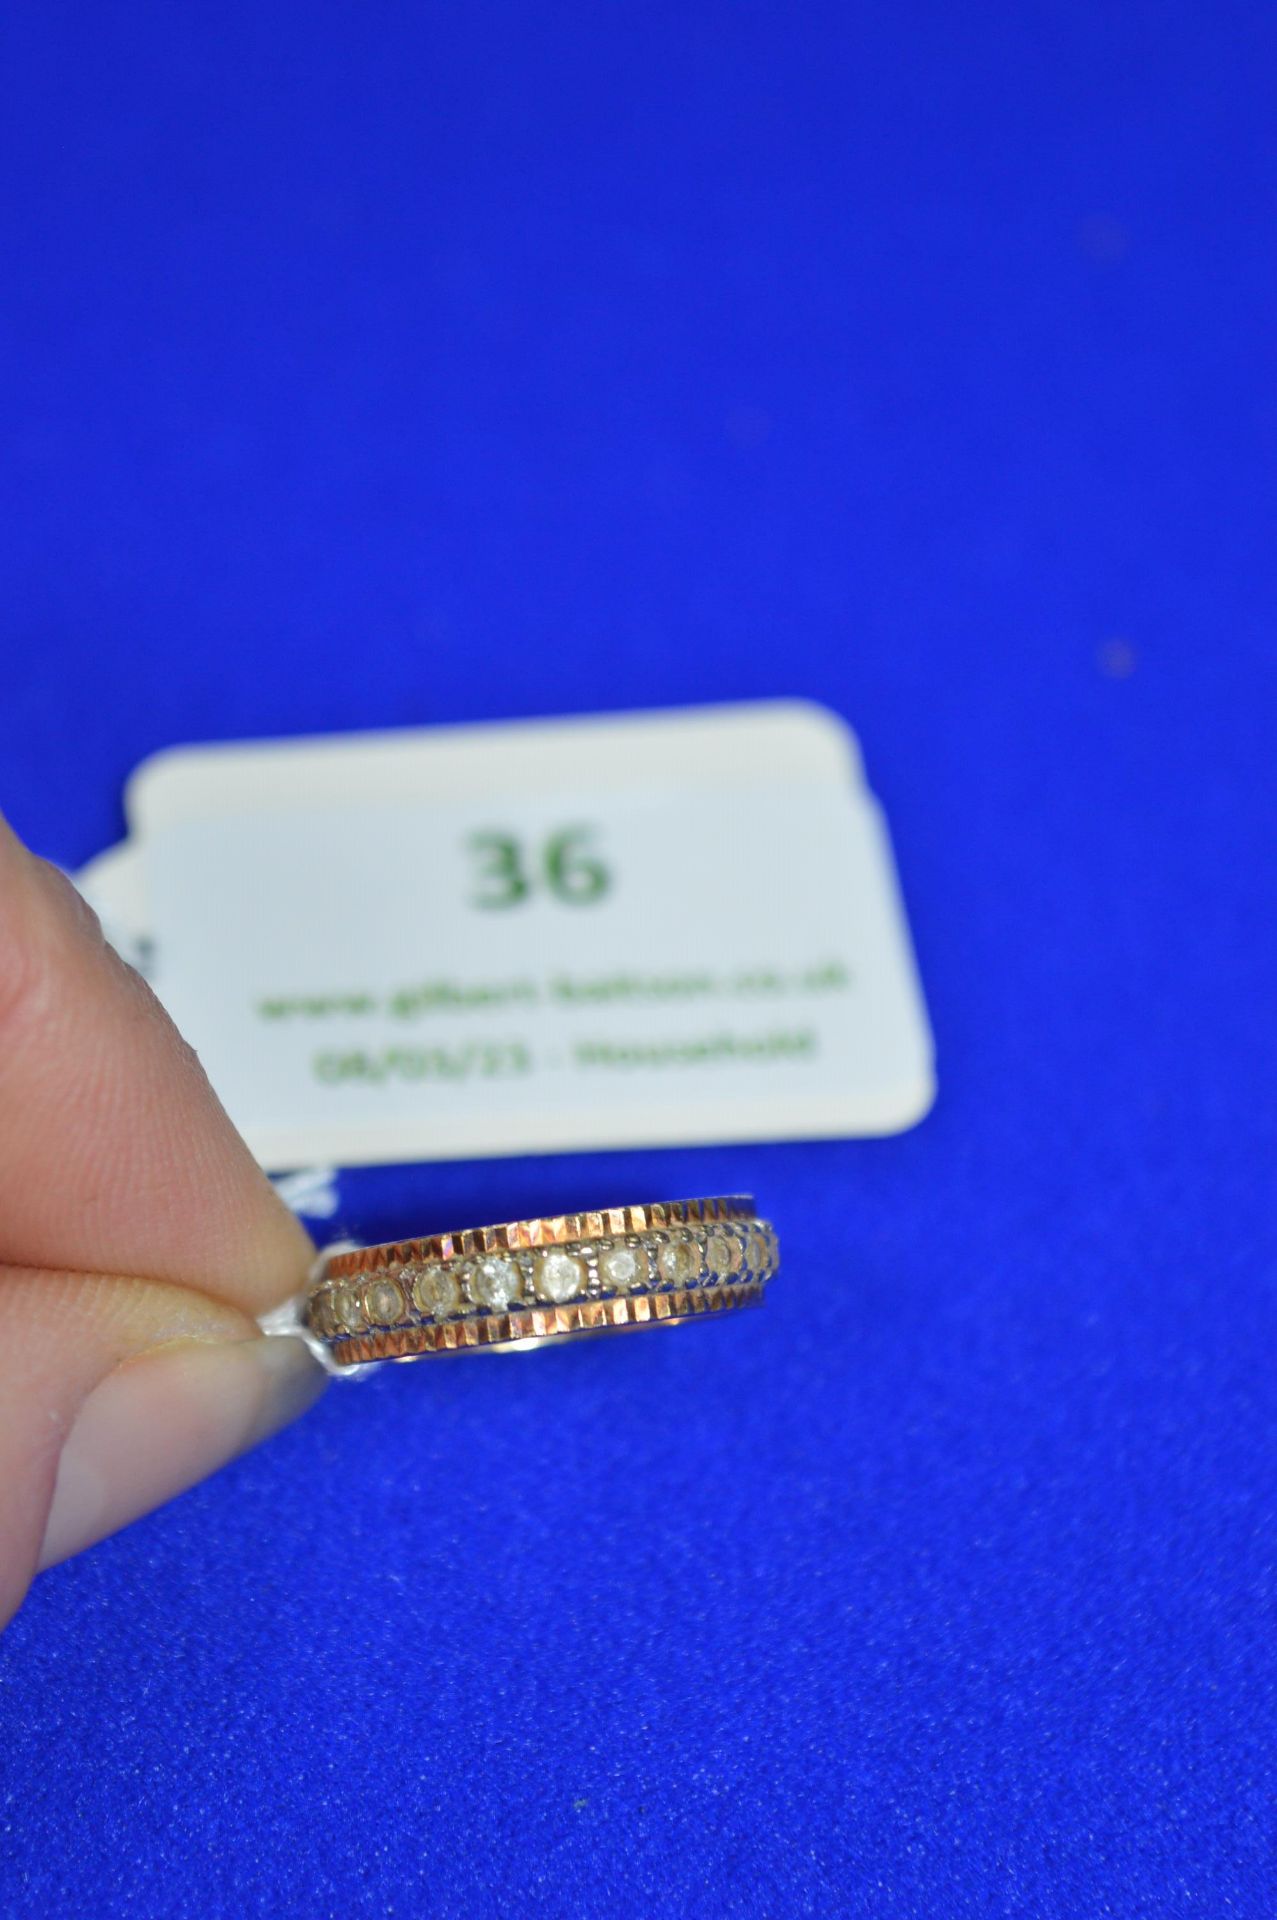 9k Gold Ring with CZs ~3.6g Size: N - Image 2 of 2